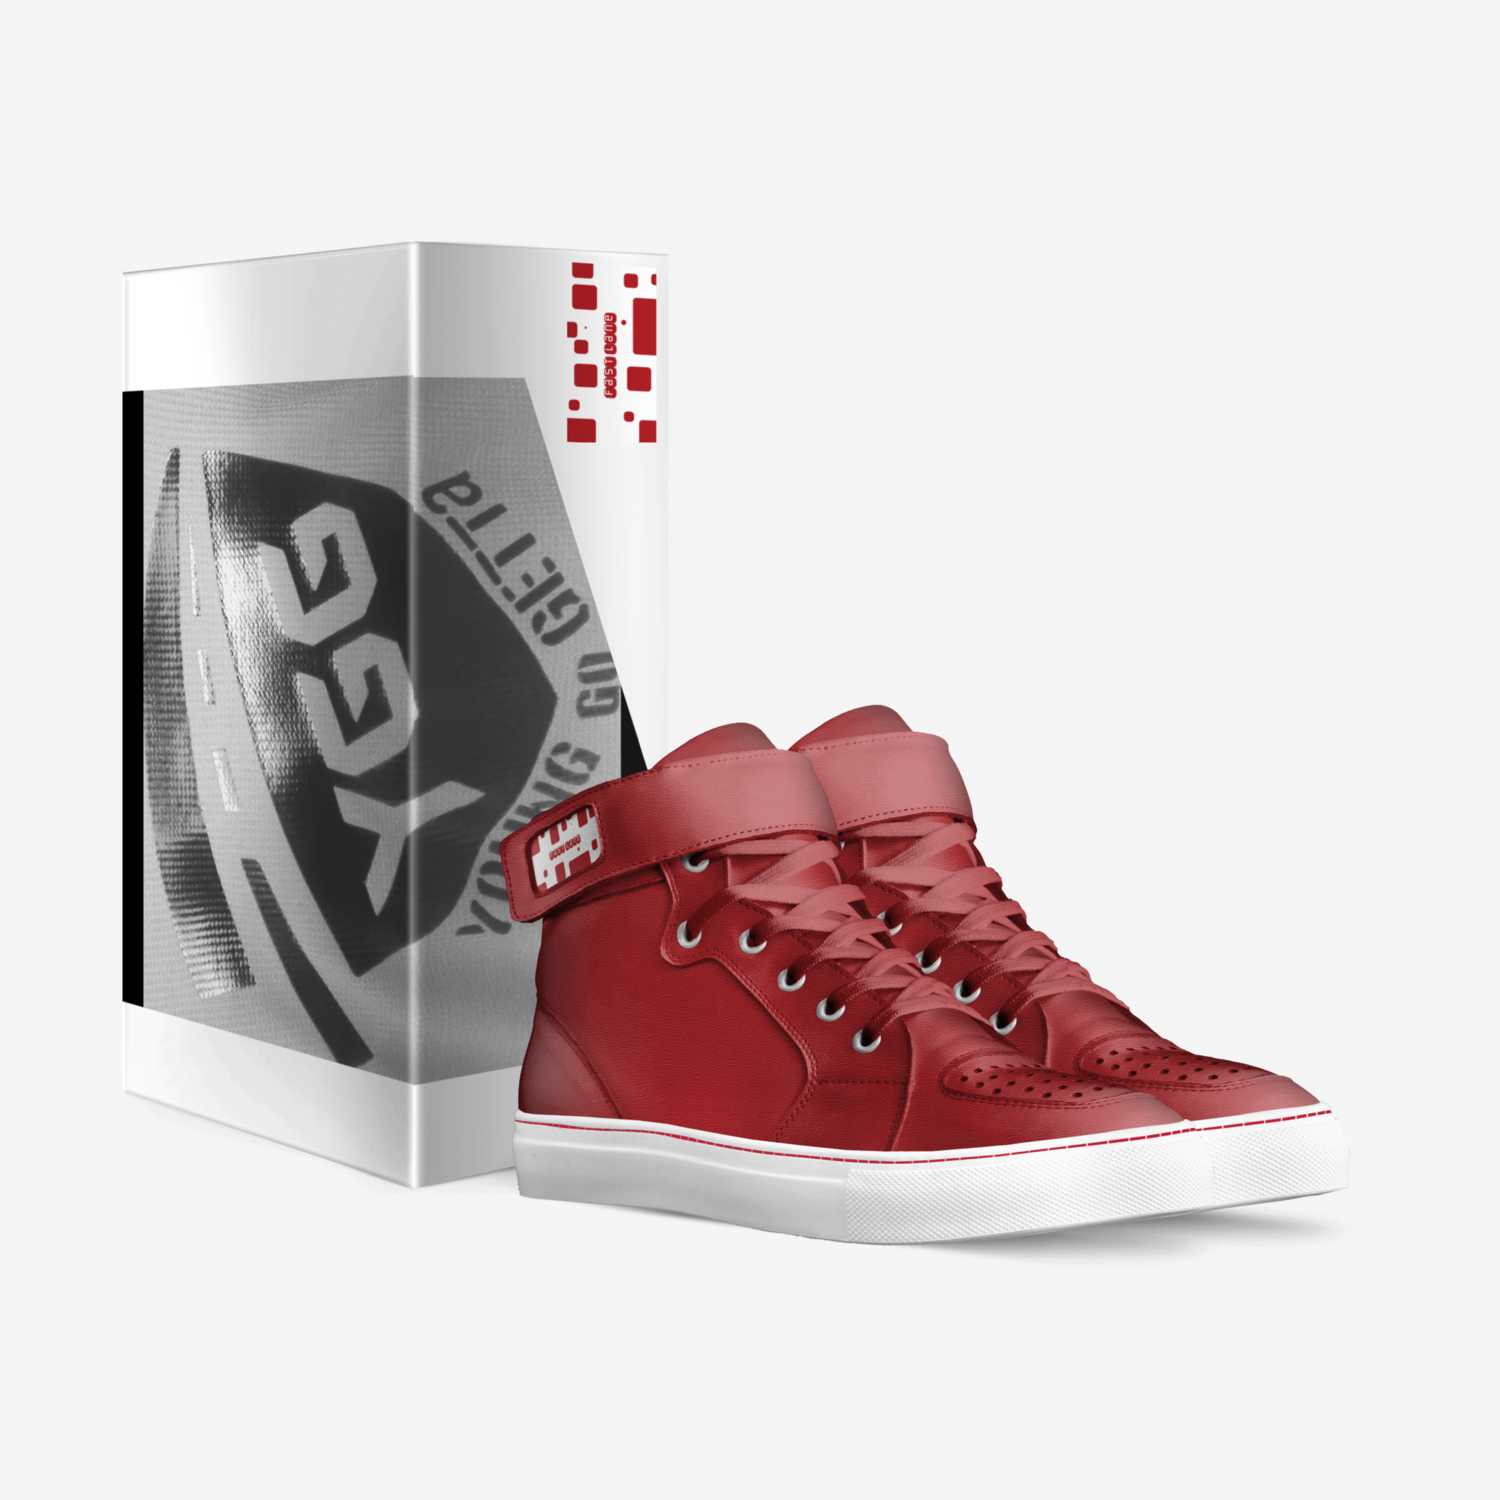 YGG fast lane  custom made in Italy shoes by Yggclothing | Box view